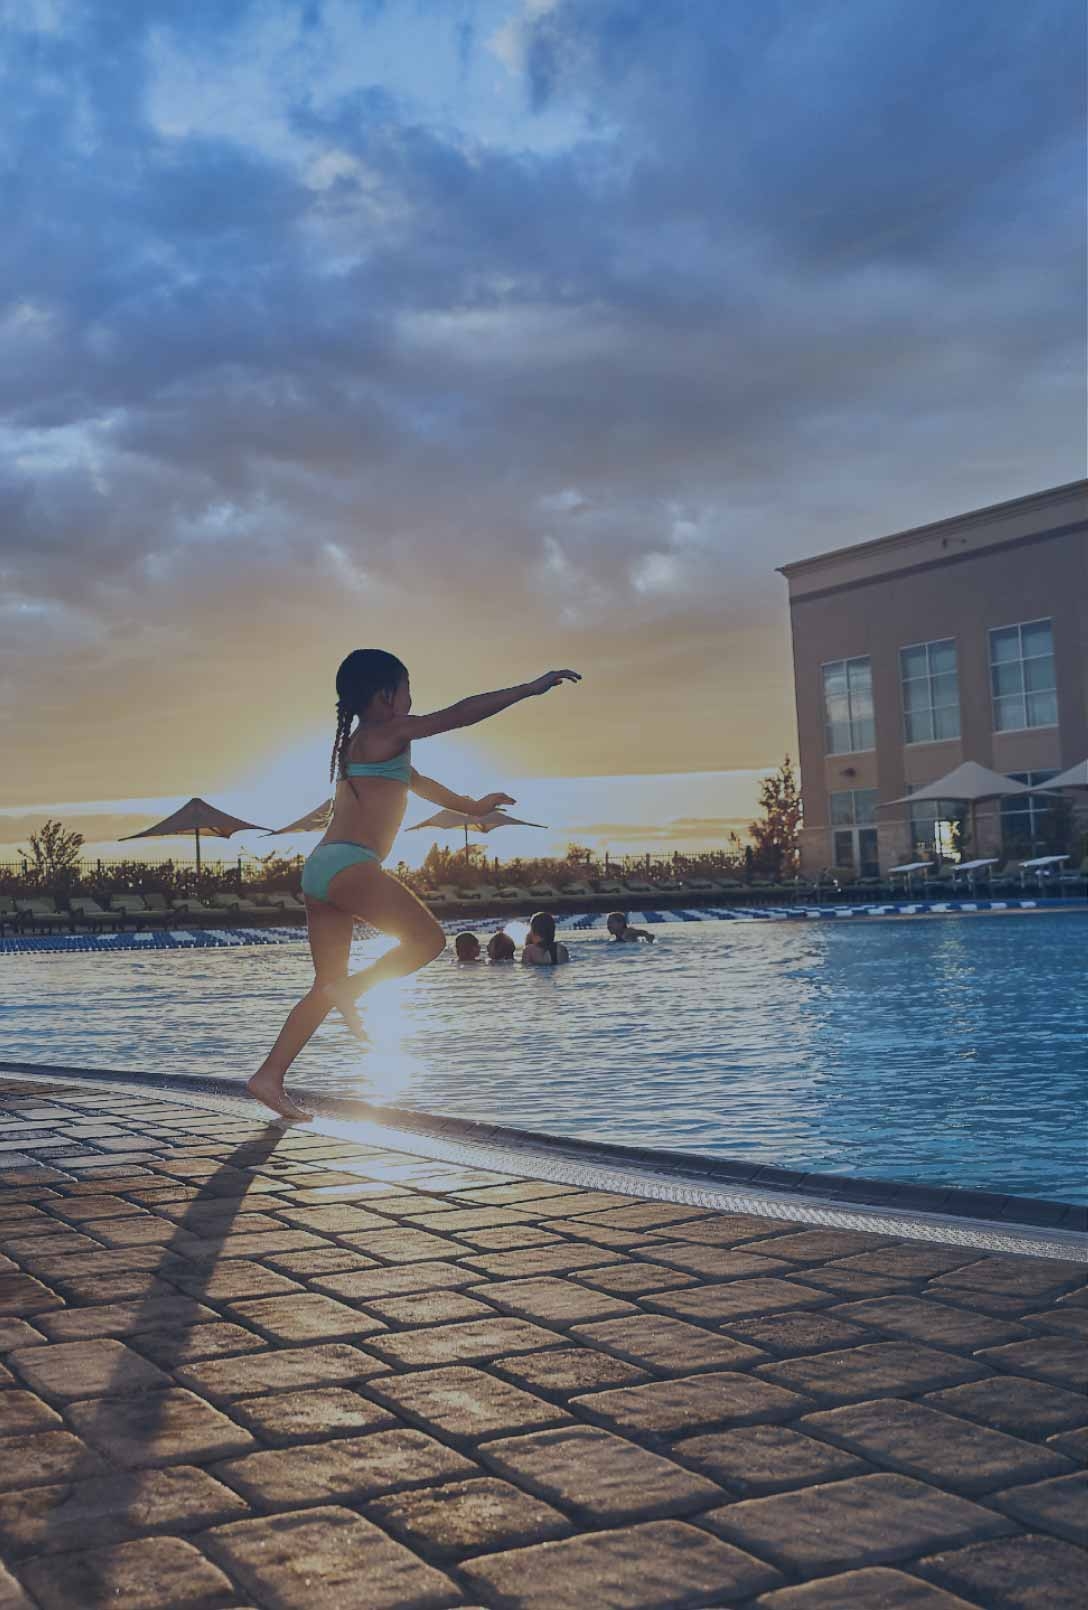 A dad watches his daughter jump into a life time outdoor pool at sunset